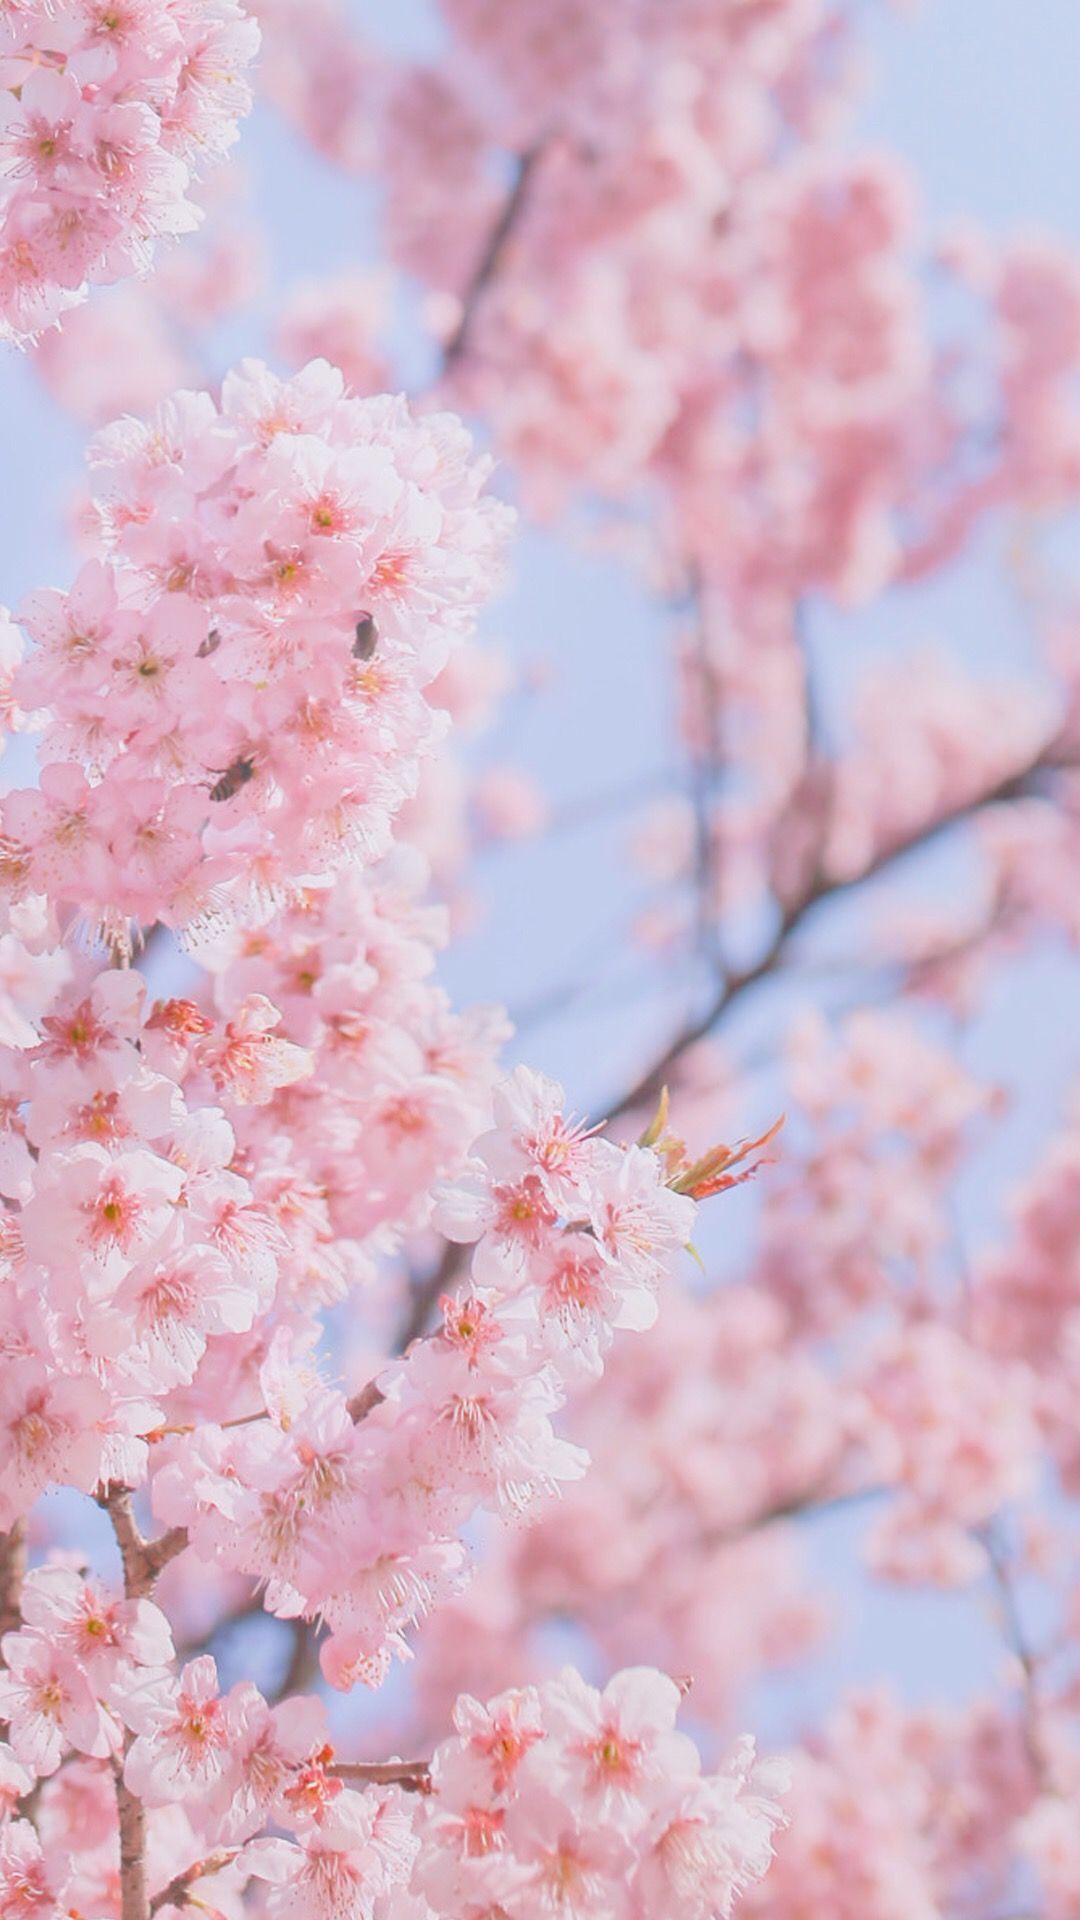 A close up of pink flowers on a tree - Cherry blossom